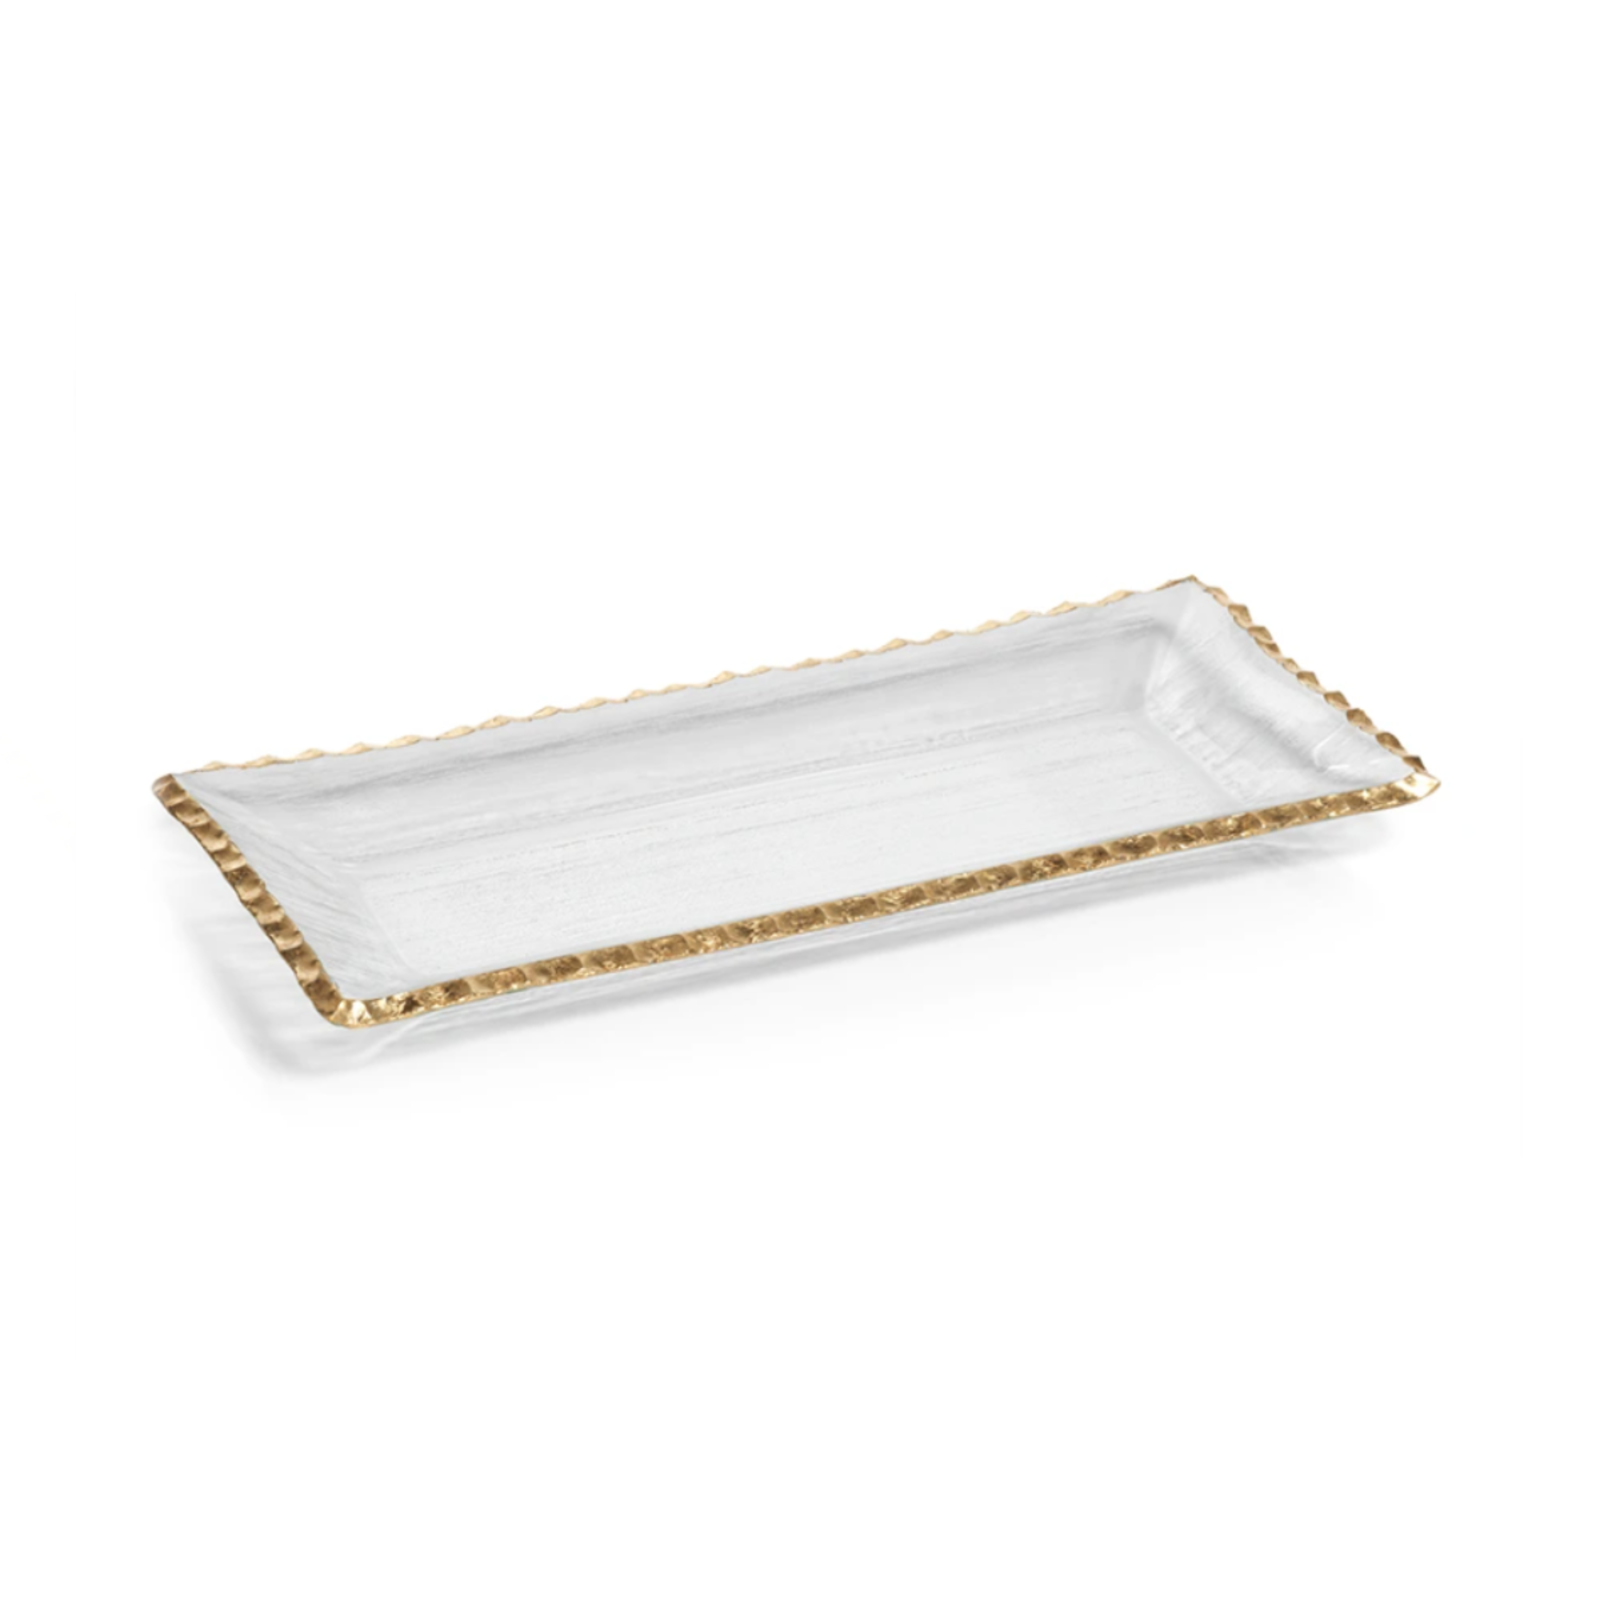 Zodax Textured Rect Tray with Jagged Gold Rim 19.75"    CH-5769 loading=